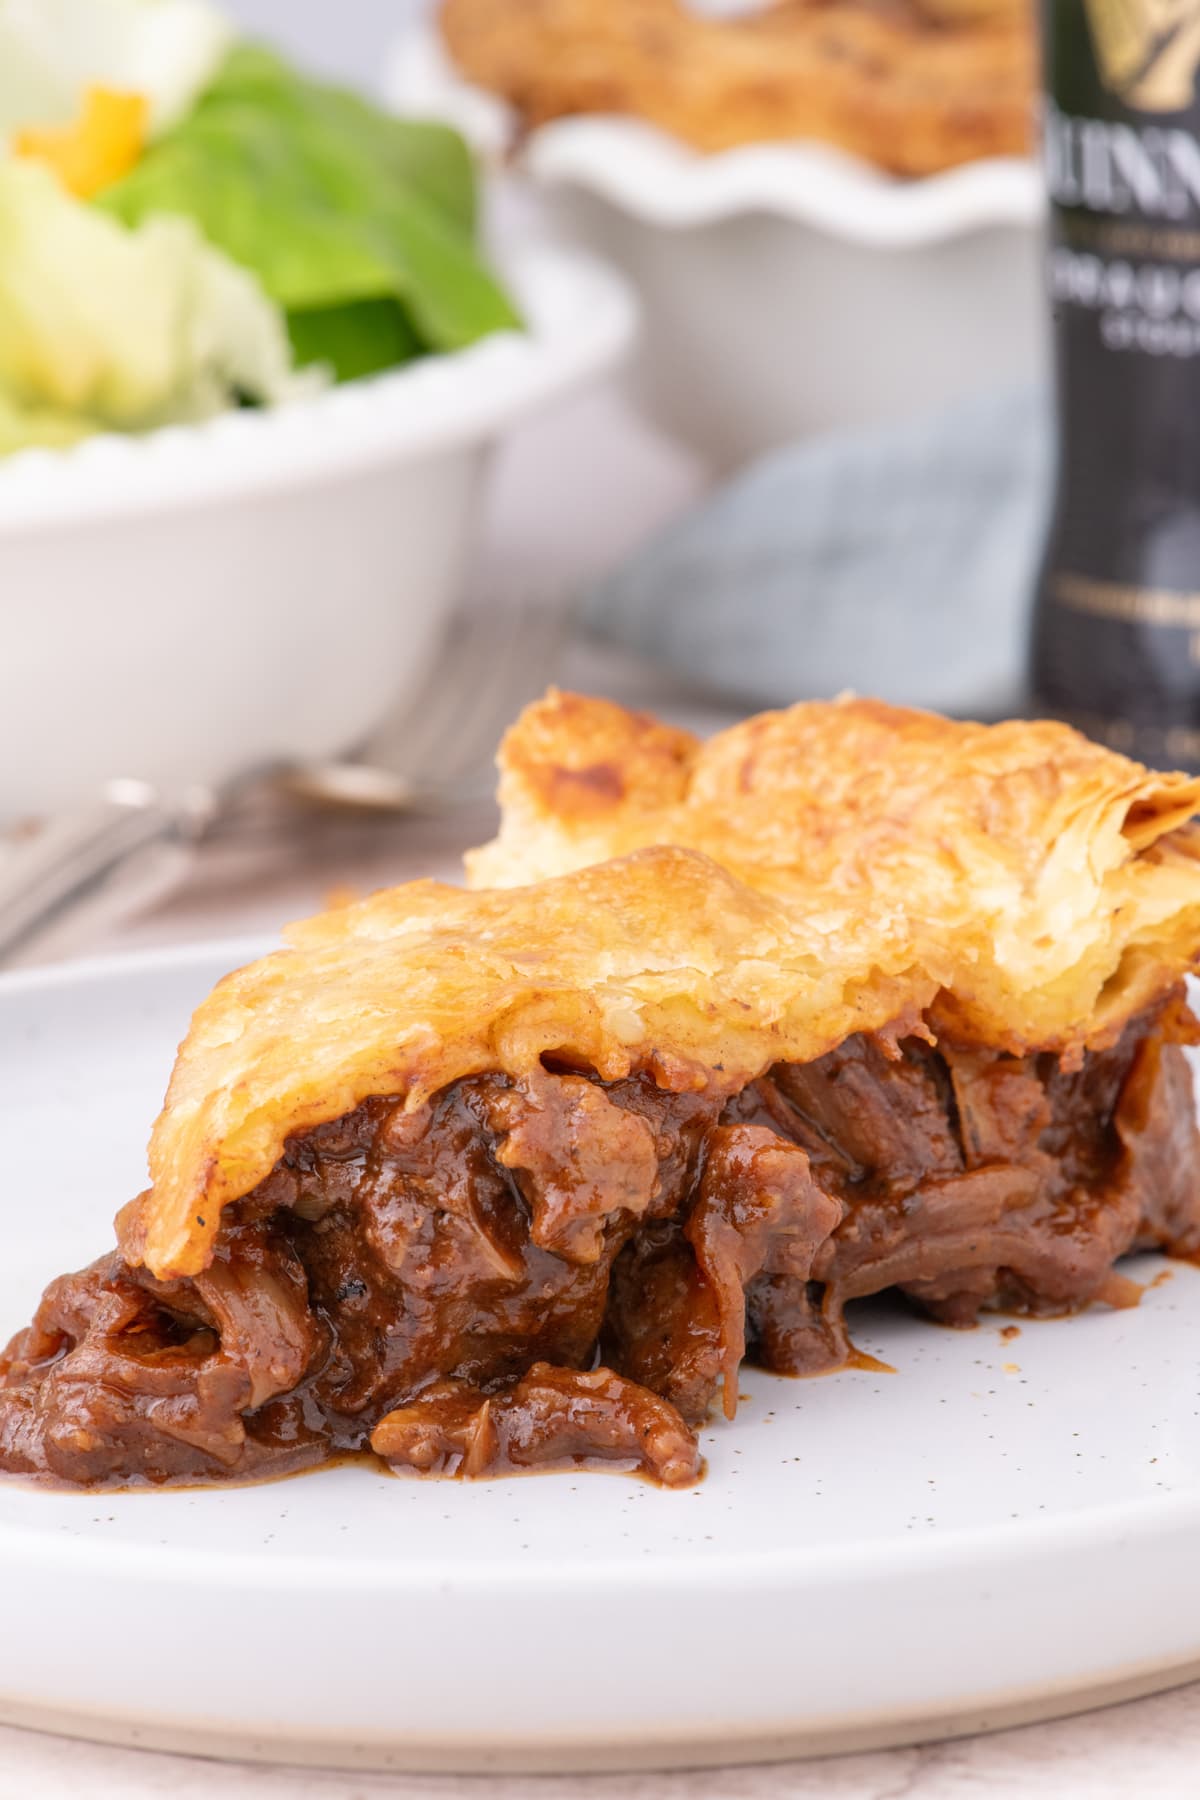 slice of Steak and Ale Pie on white plate